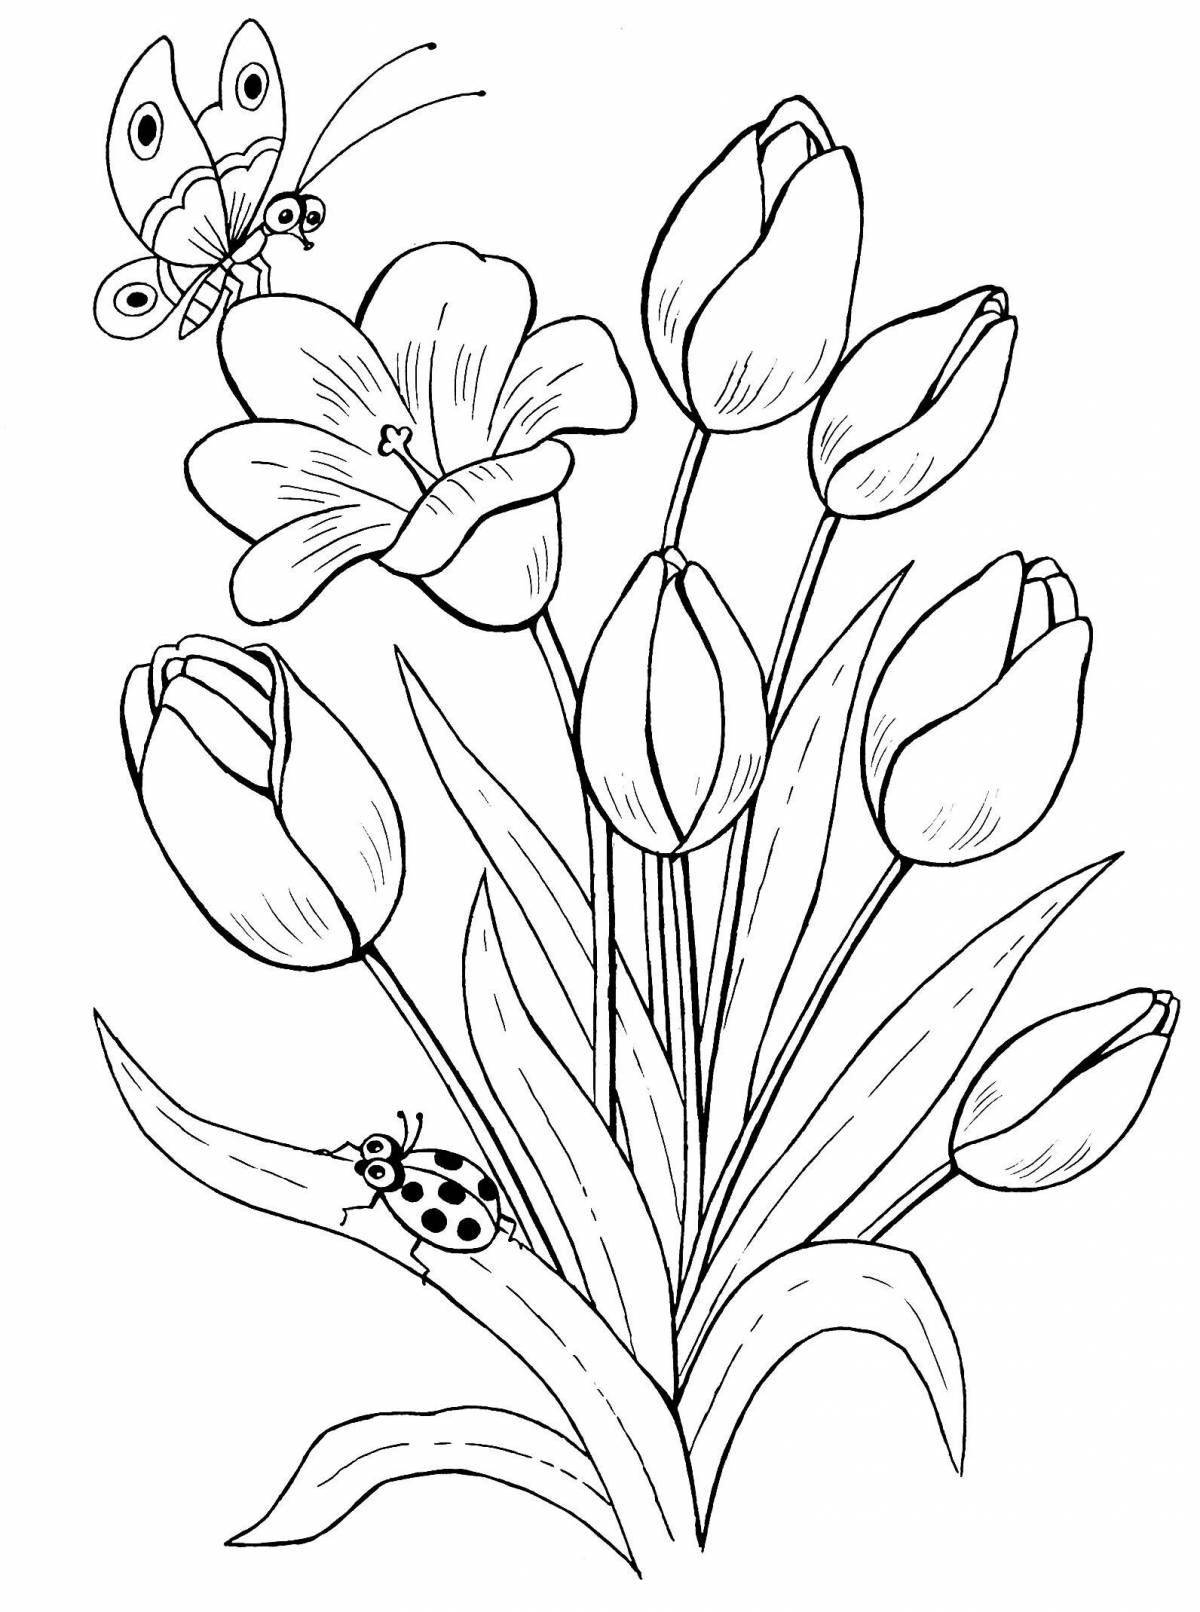 Fabulous coloring card with flowers